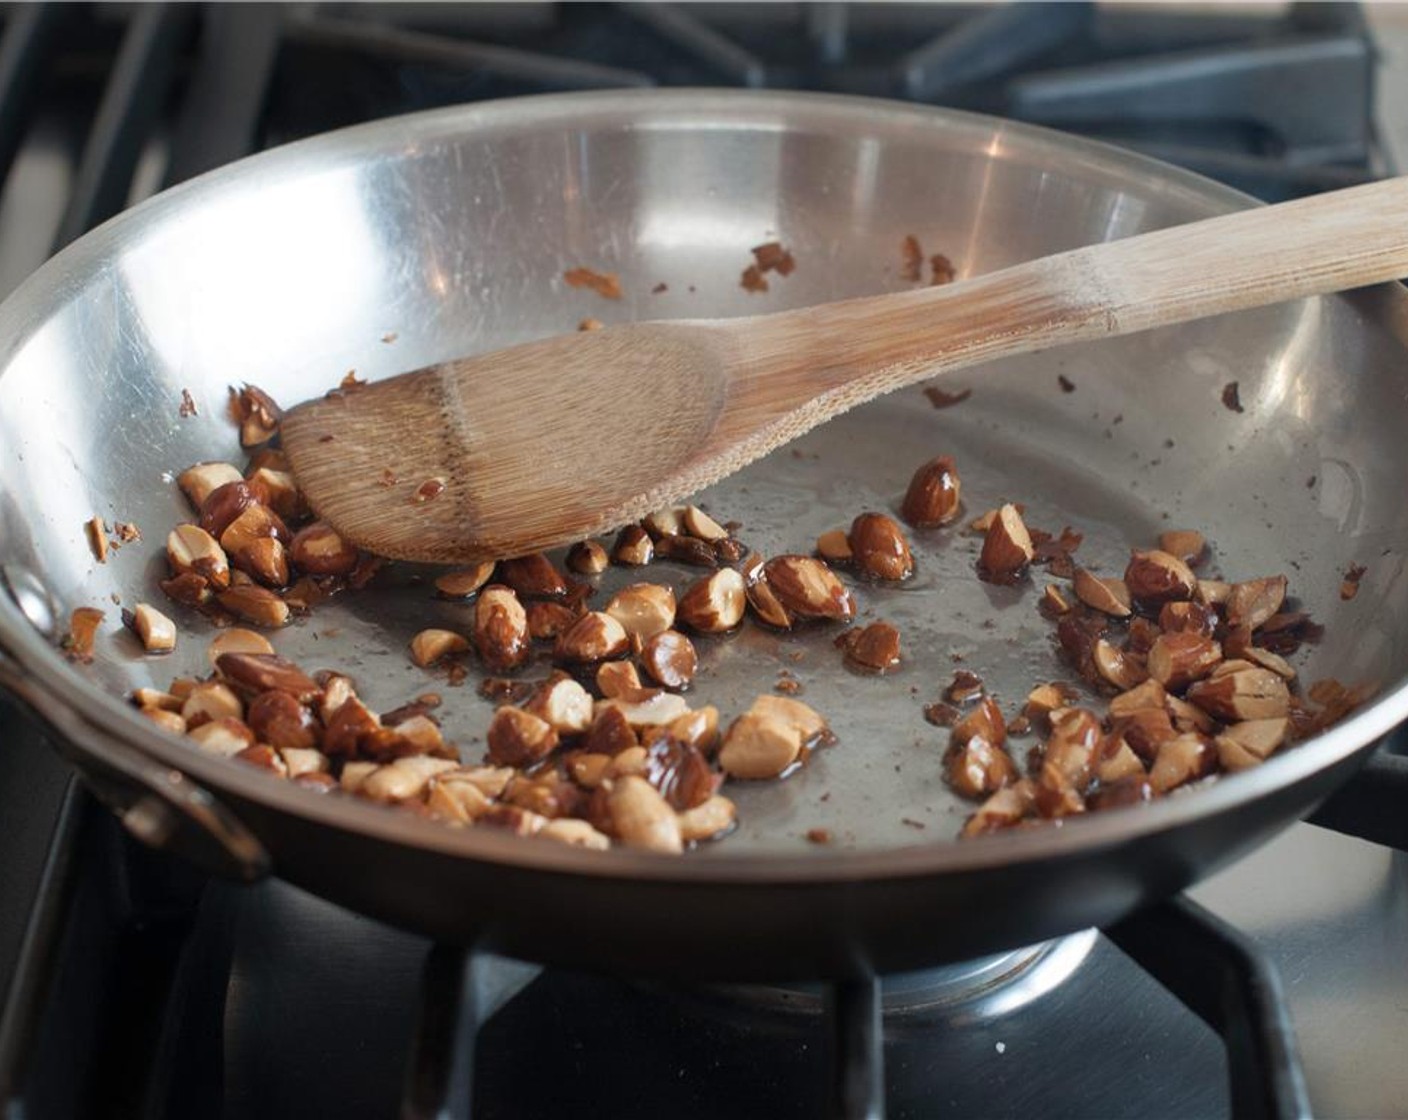 step 3 Use 1 tbsp of Extra-Virgin Olive Oil (1/2 cup) to toast the almonds for 2 to 3 minutes over medium-high heat. Transfer the nuts to a paper towel lined plate and sprinkle with some fine sea salt.